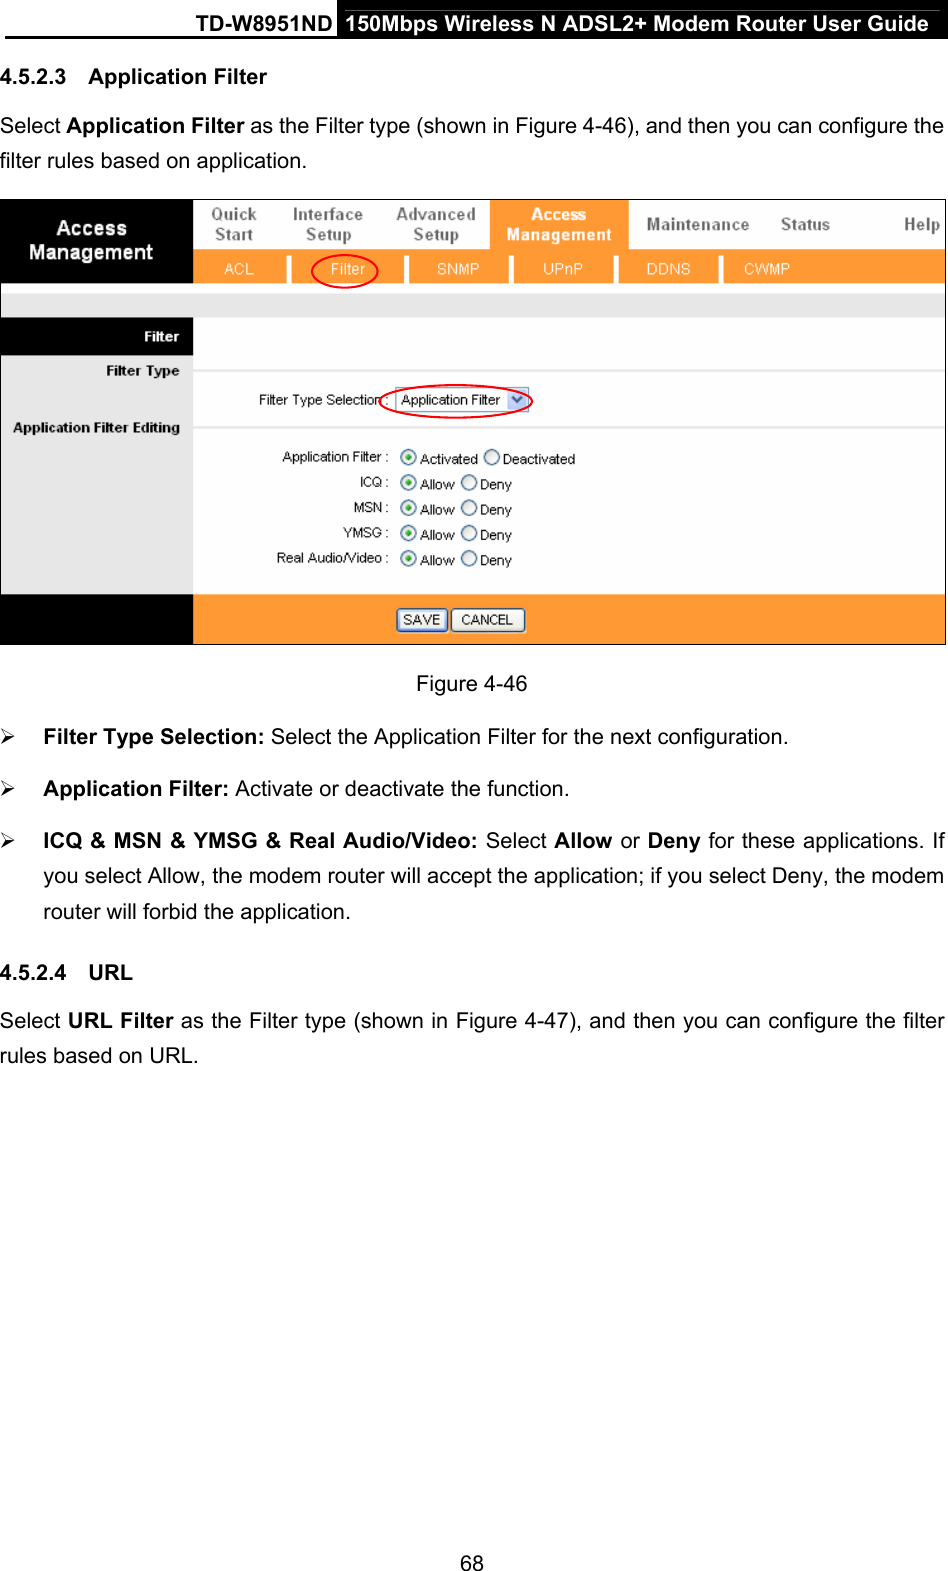 TD-W8951ND  150Mbps Wireless N ADSL2+ Modem Router User Guide 4.5.2.3  Application Filter Select Application Filter as the Filter type (shown in Figure 4-46), and then you can configure the filter rules based on application.  Figure 4-46  Filter Type Selection: Select the Application Filter for the next configuration.  Application Filter: Activate or deactivate the function.  ICQ &amp; MSN &amp; YMSG &amp; Real Audio/Video: Select Allow or Deny for these applications. If you select Allow, the modem router will accept the application; if you select Deny, the modem router will forbid the application. 4.5.2.4  URL Select URL Filter as the Filter type (shown in Figure 4-47), and then you can configure the filter rules based on URL. 68 